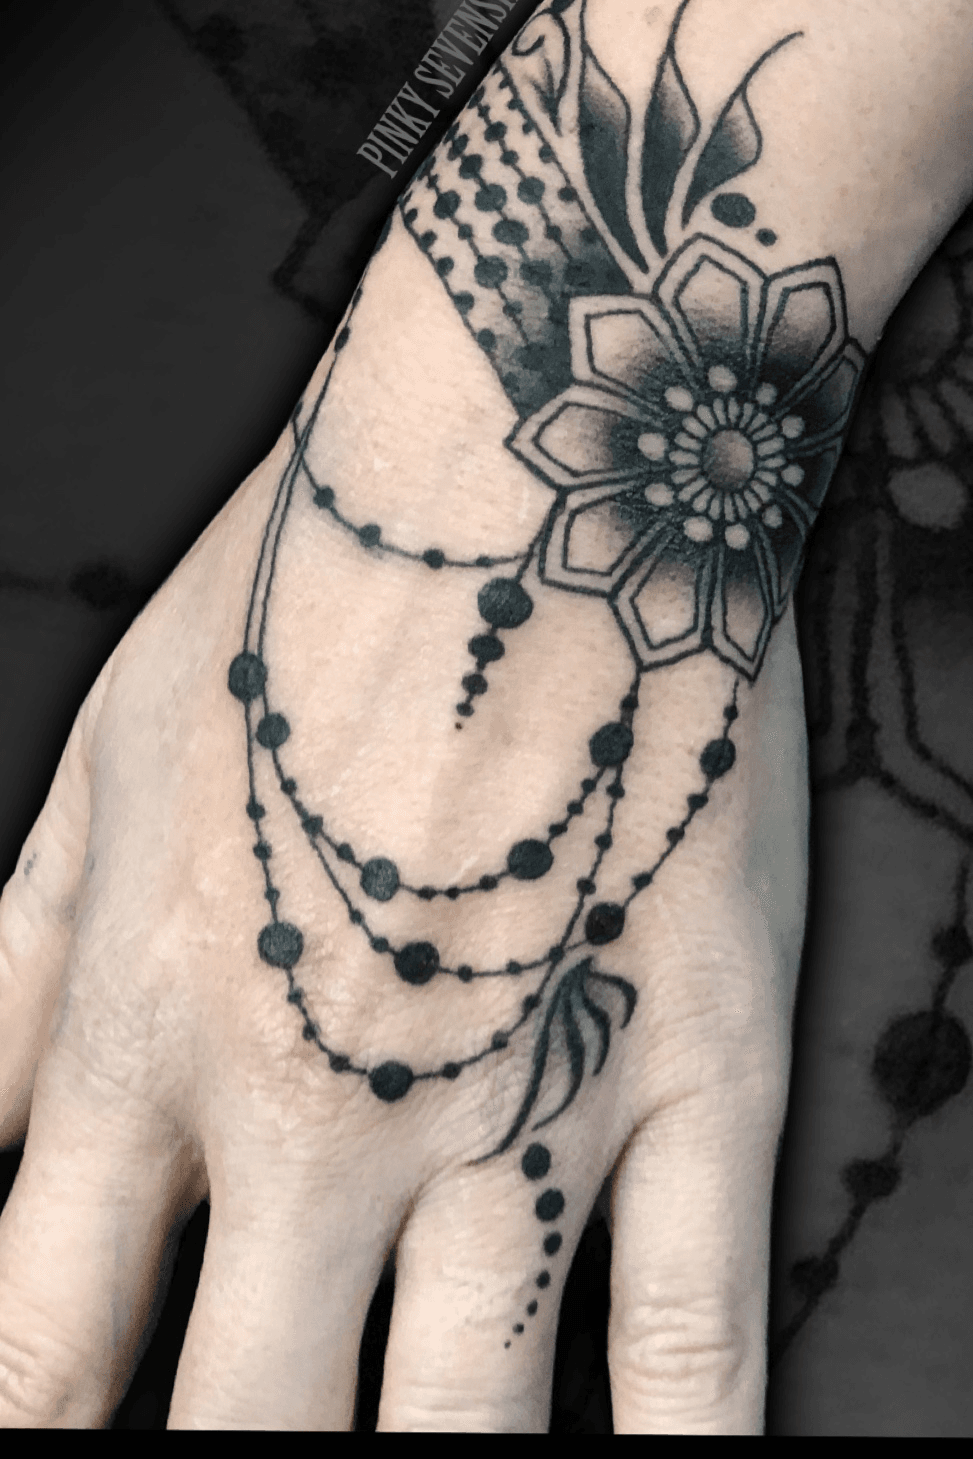 The Tattoo Den  Jewellery and lace style hand tattoo   Facebook